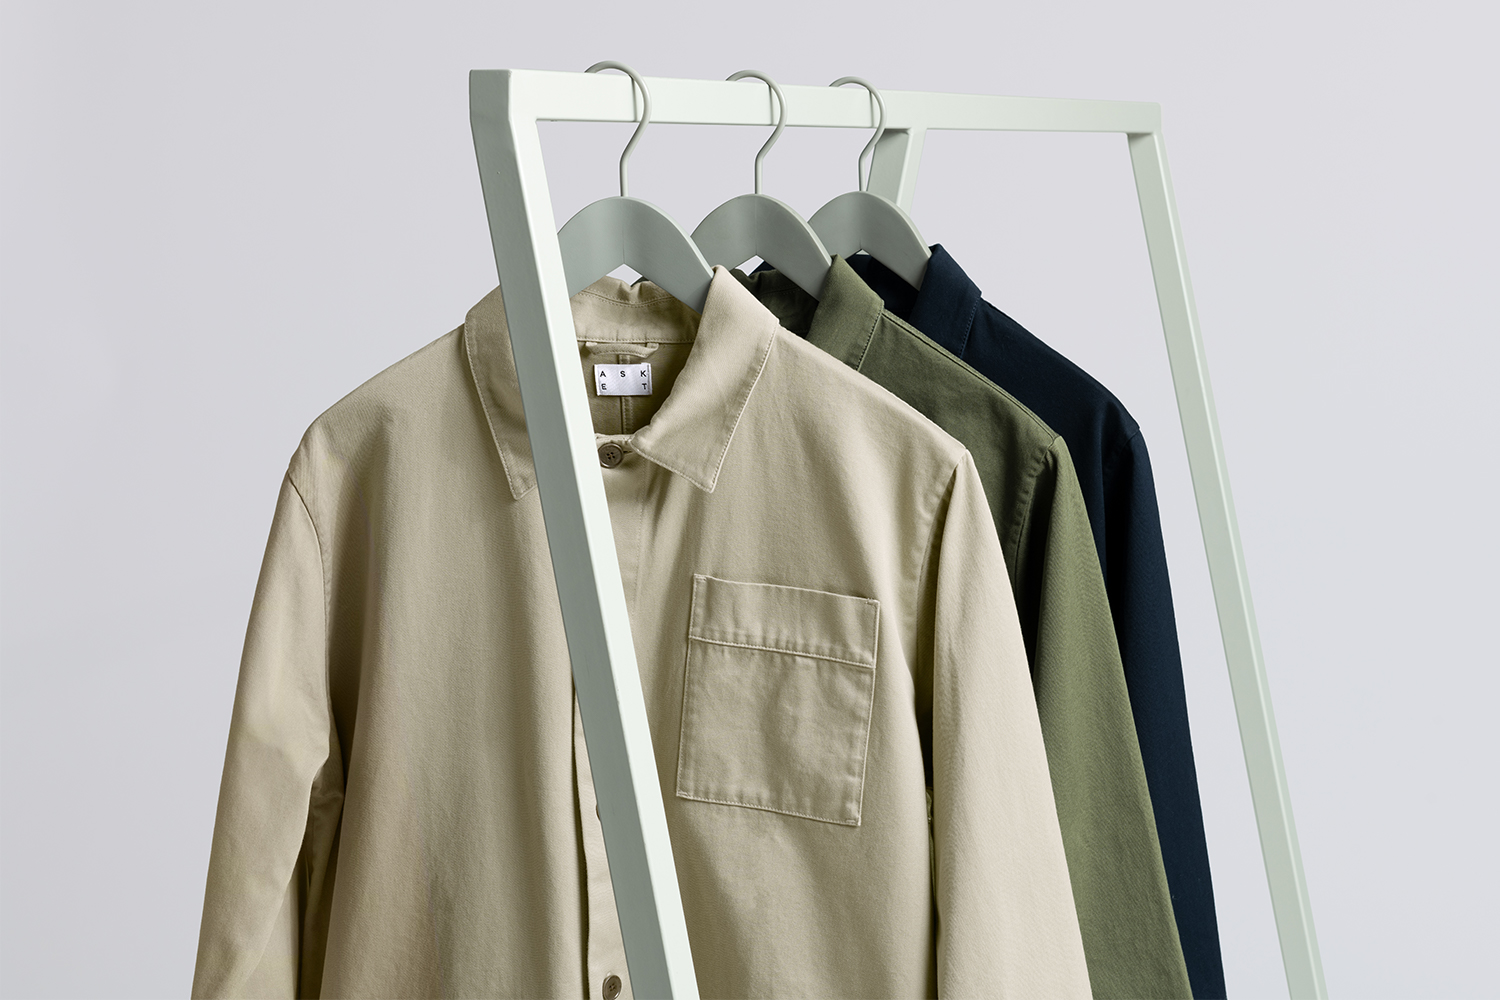 A clothing rack holding overshirts from menswear brand Asket